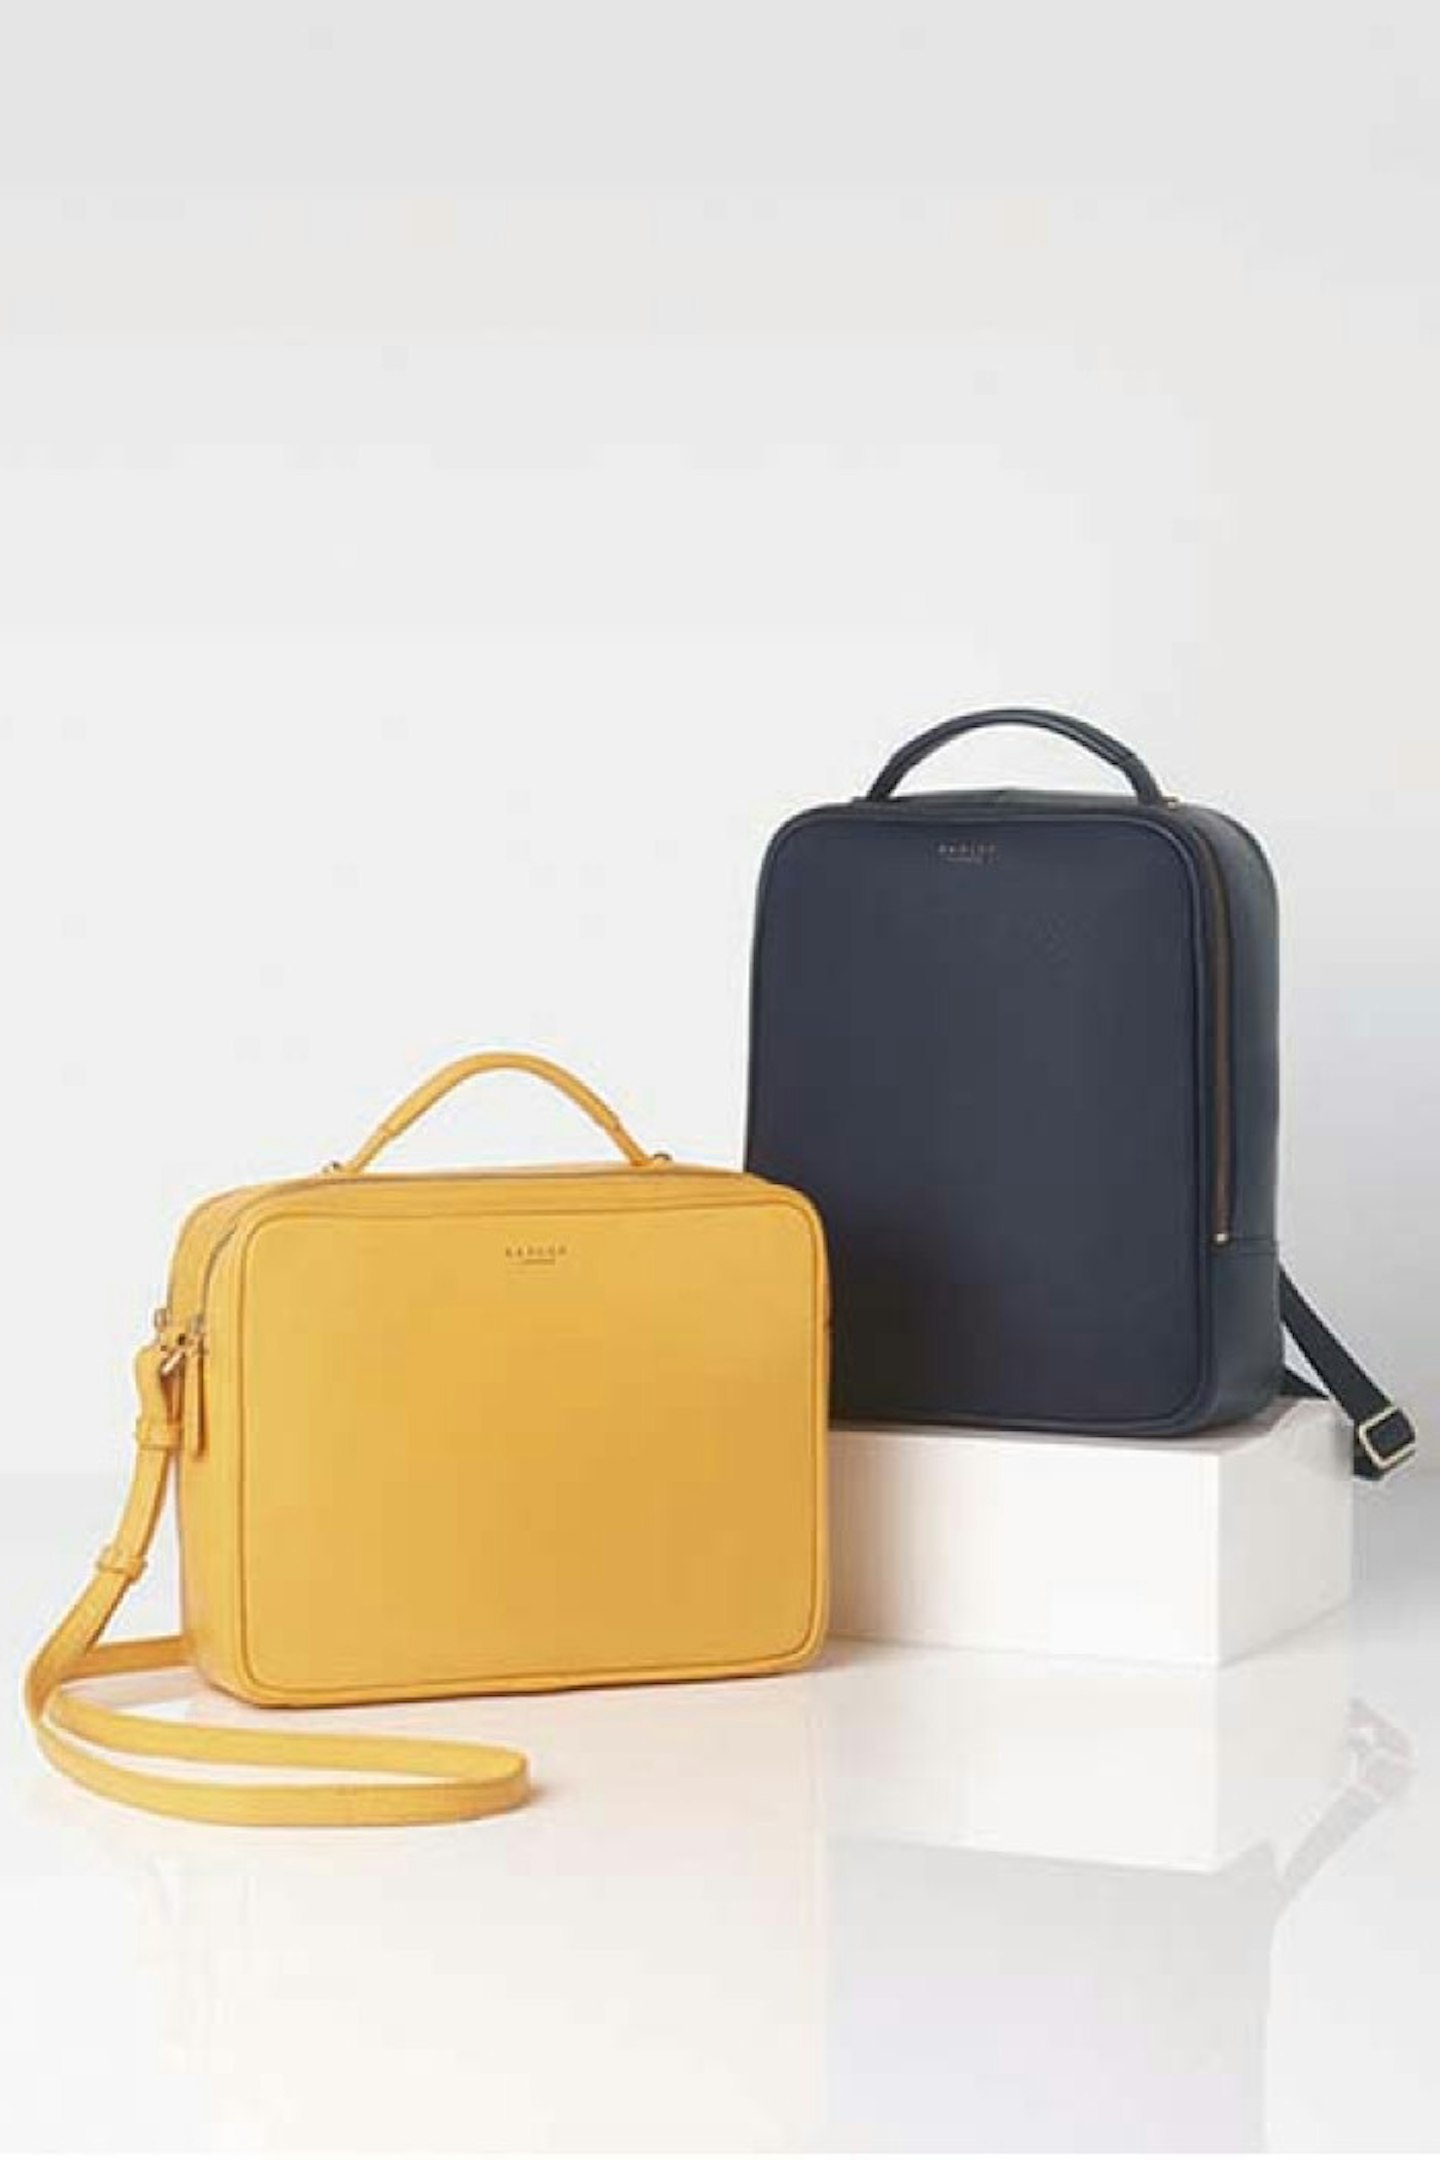 Victoria Park & London Fields from the new Radley collection SS15.